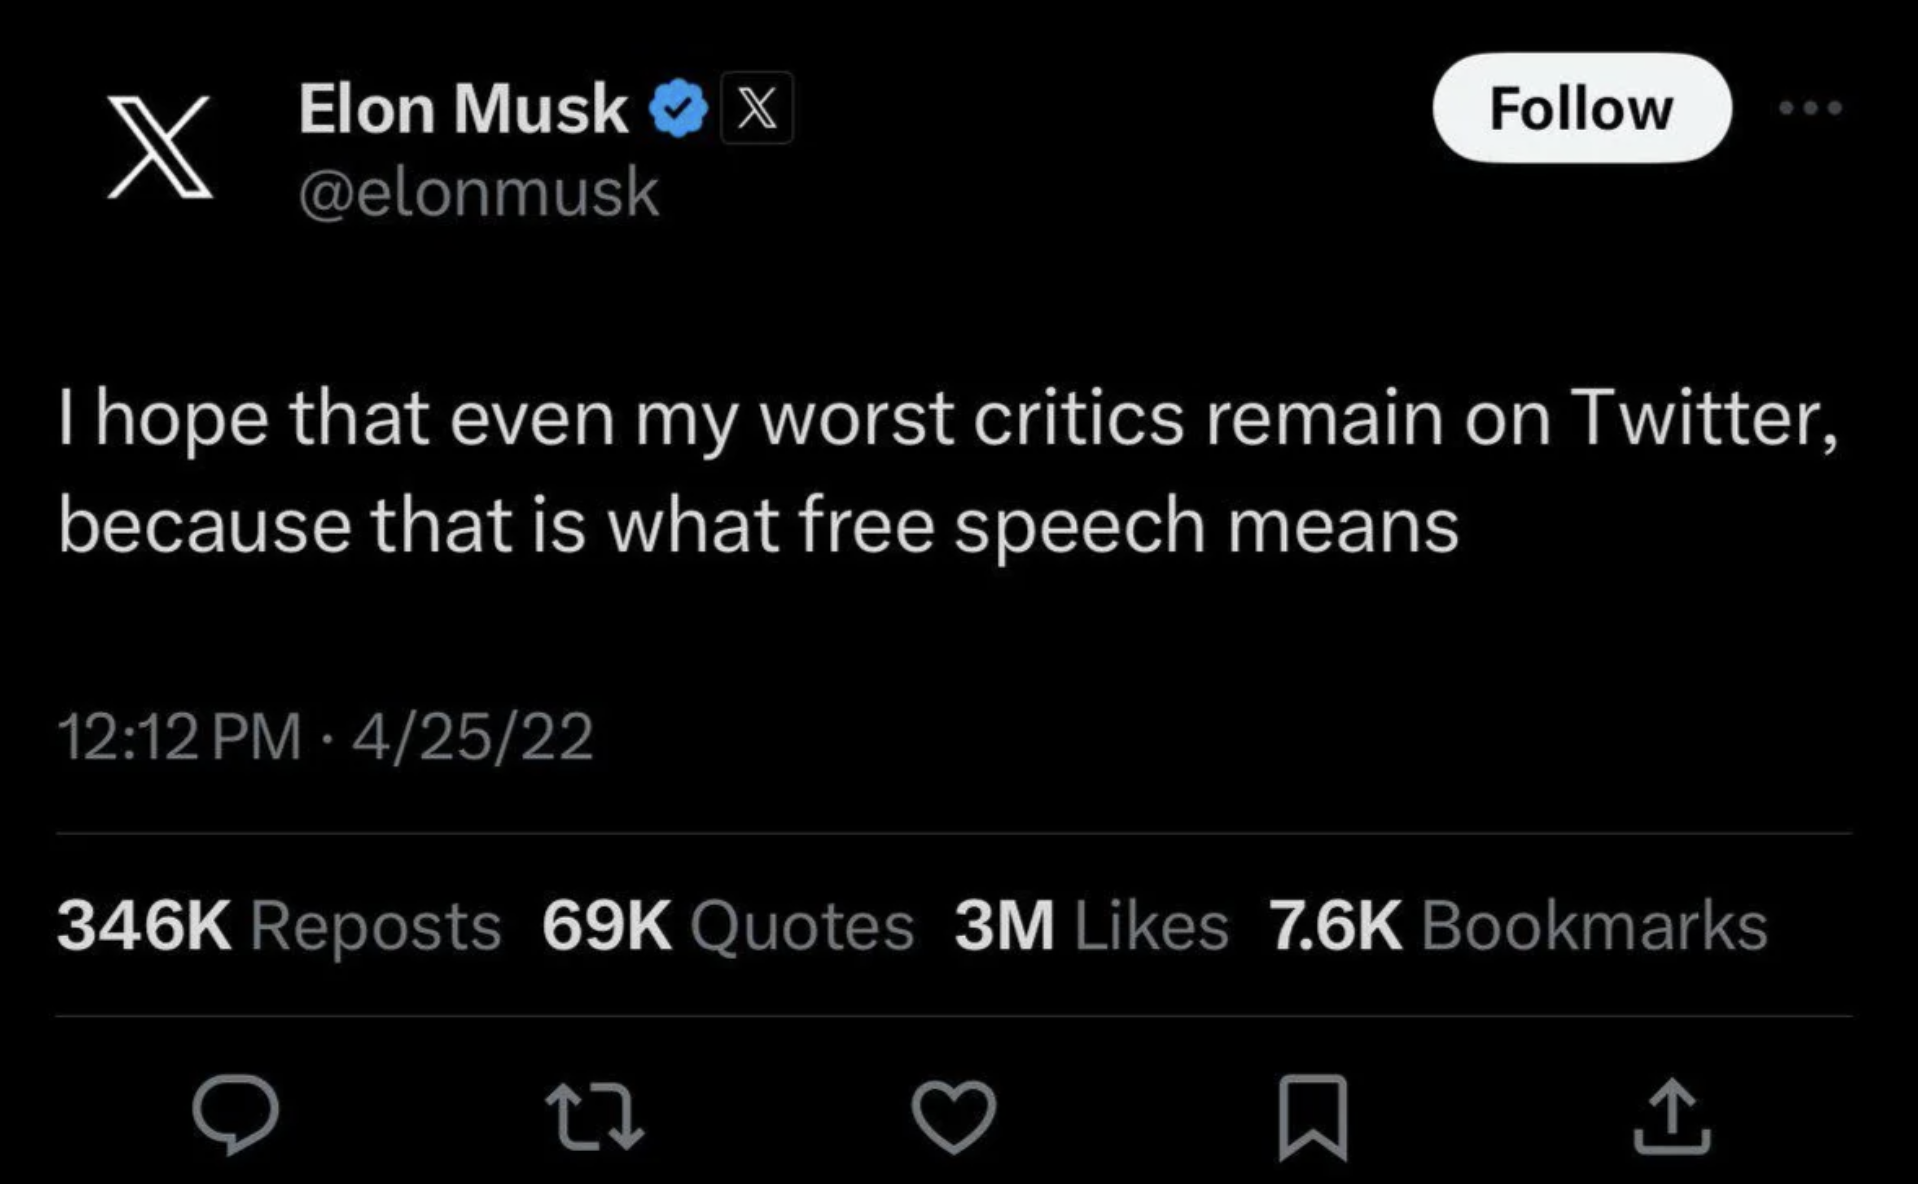 screenshot - X Elon Musk X I hope that even my worst critics remain on Twitter, because that is what free speech means 425 Reposts 69K Quotes 3M Bookmarks 27